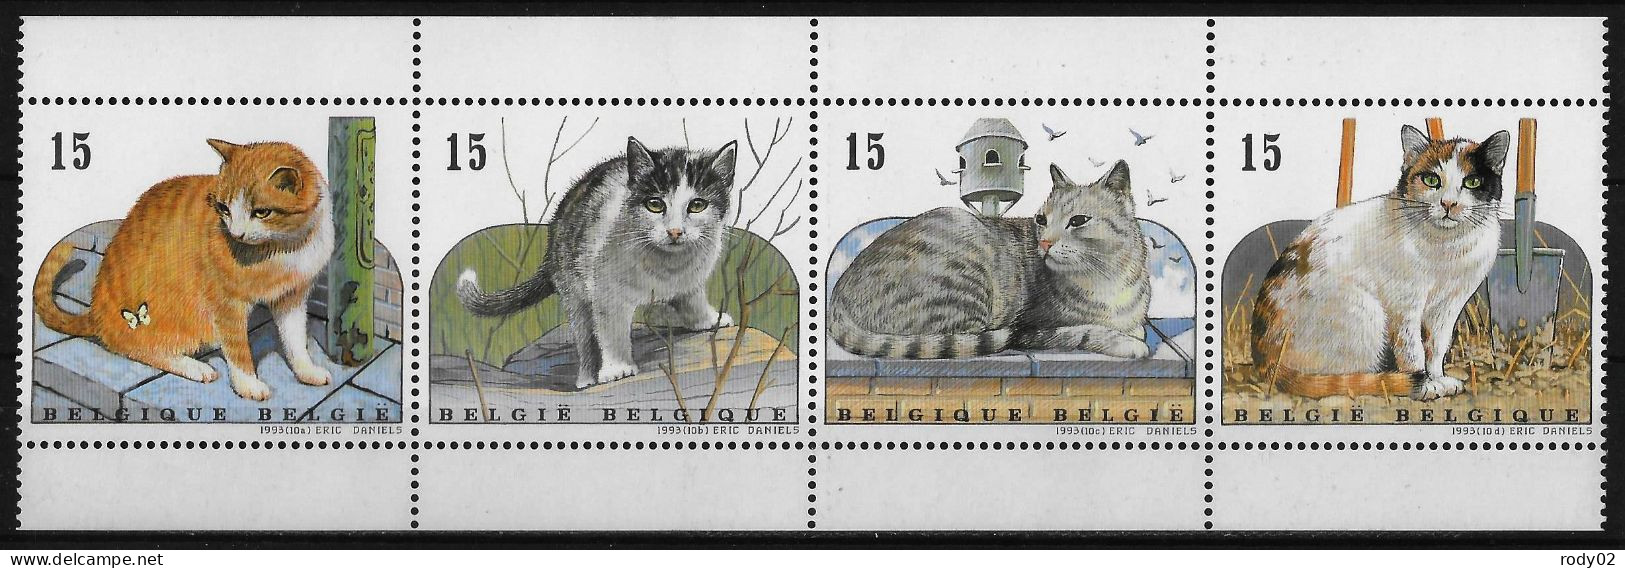 BELGIQUE - CHATS - N° 2521 A 2524 - NEUF** MNH - Chats Domestiques